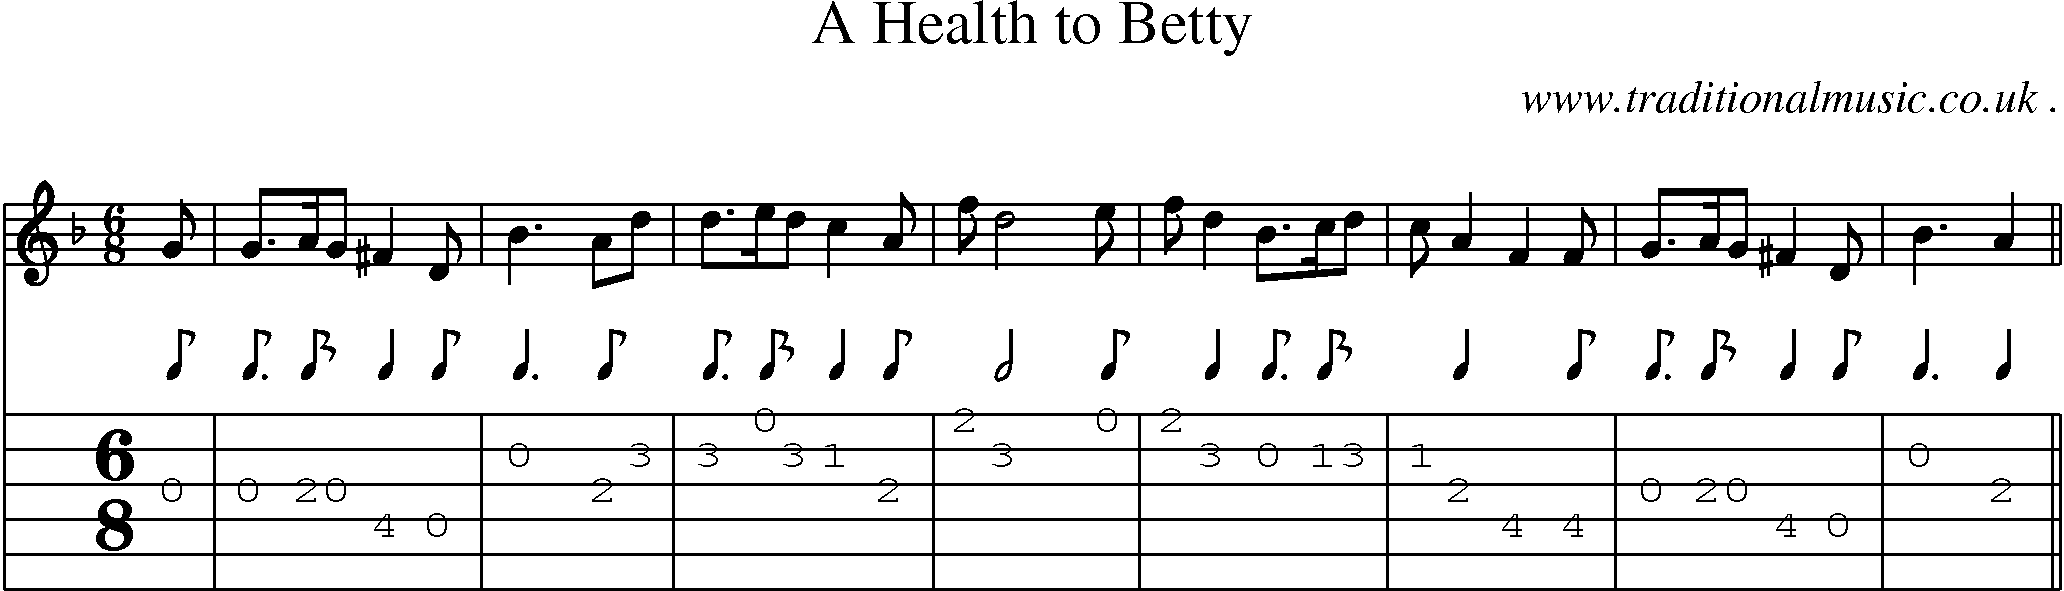 Sheet-Music and Guitar Tabs for A Health To Betty